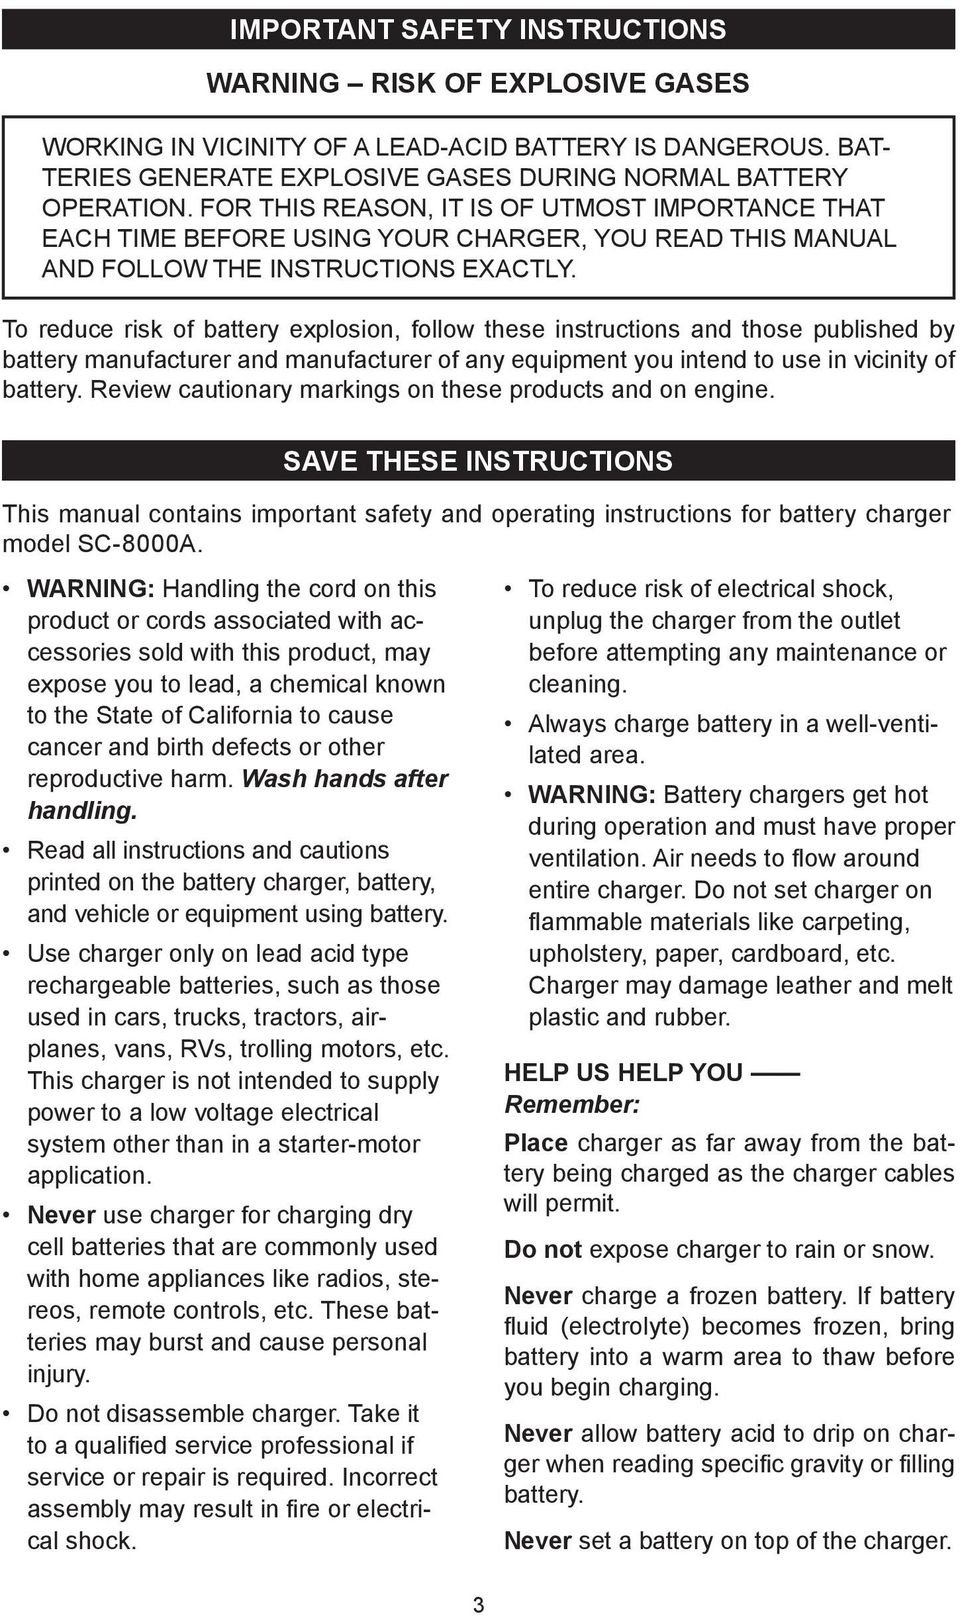 To reduce risk of battery explosion, follow these instructions and those published by battery manufacturer and manufacturer of any equipment you intend to use in vicinity of battery.